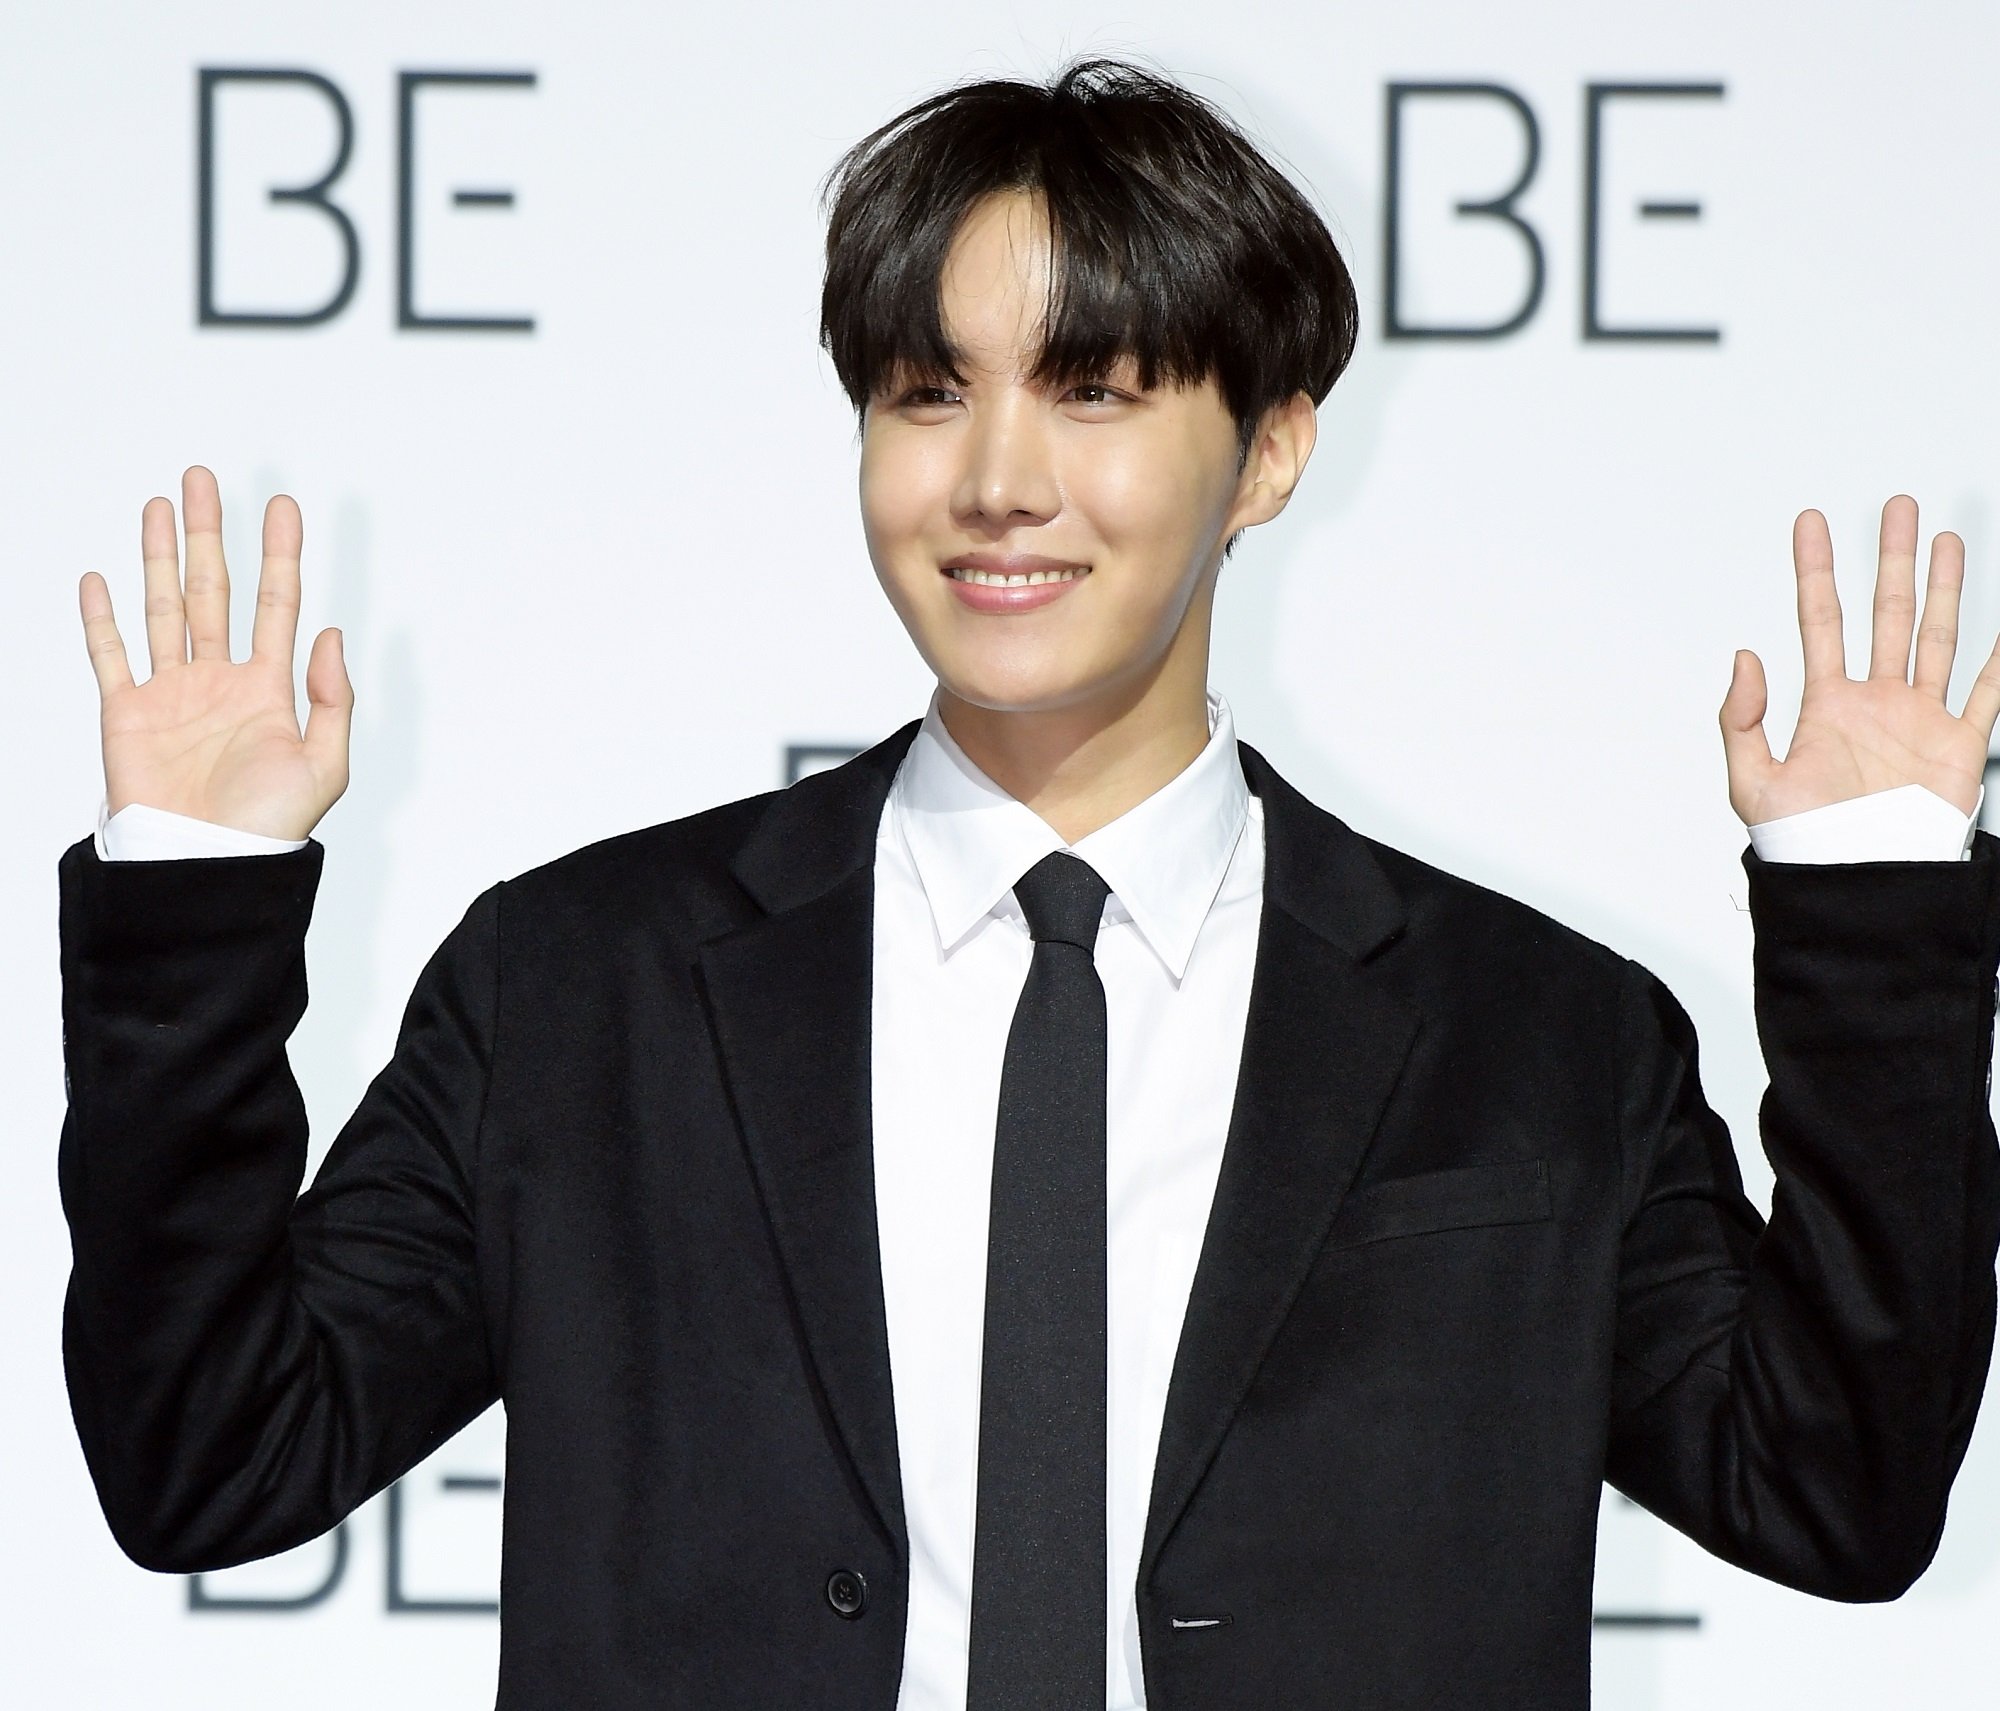 Bts: J-Hope Surprised Fans With A Full Version Of His Song 'Blue Side'